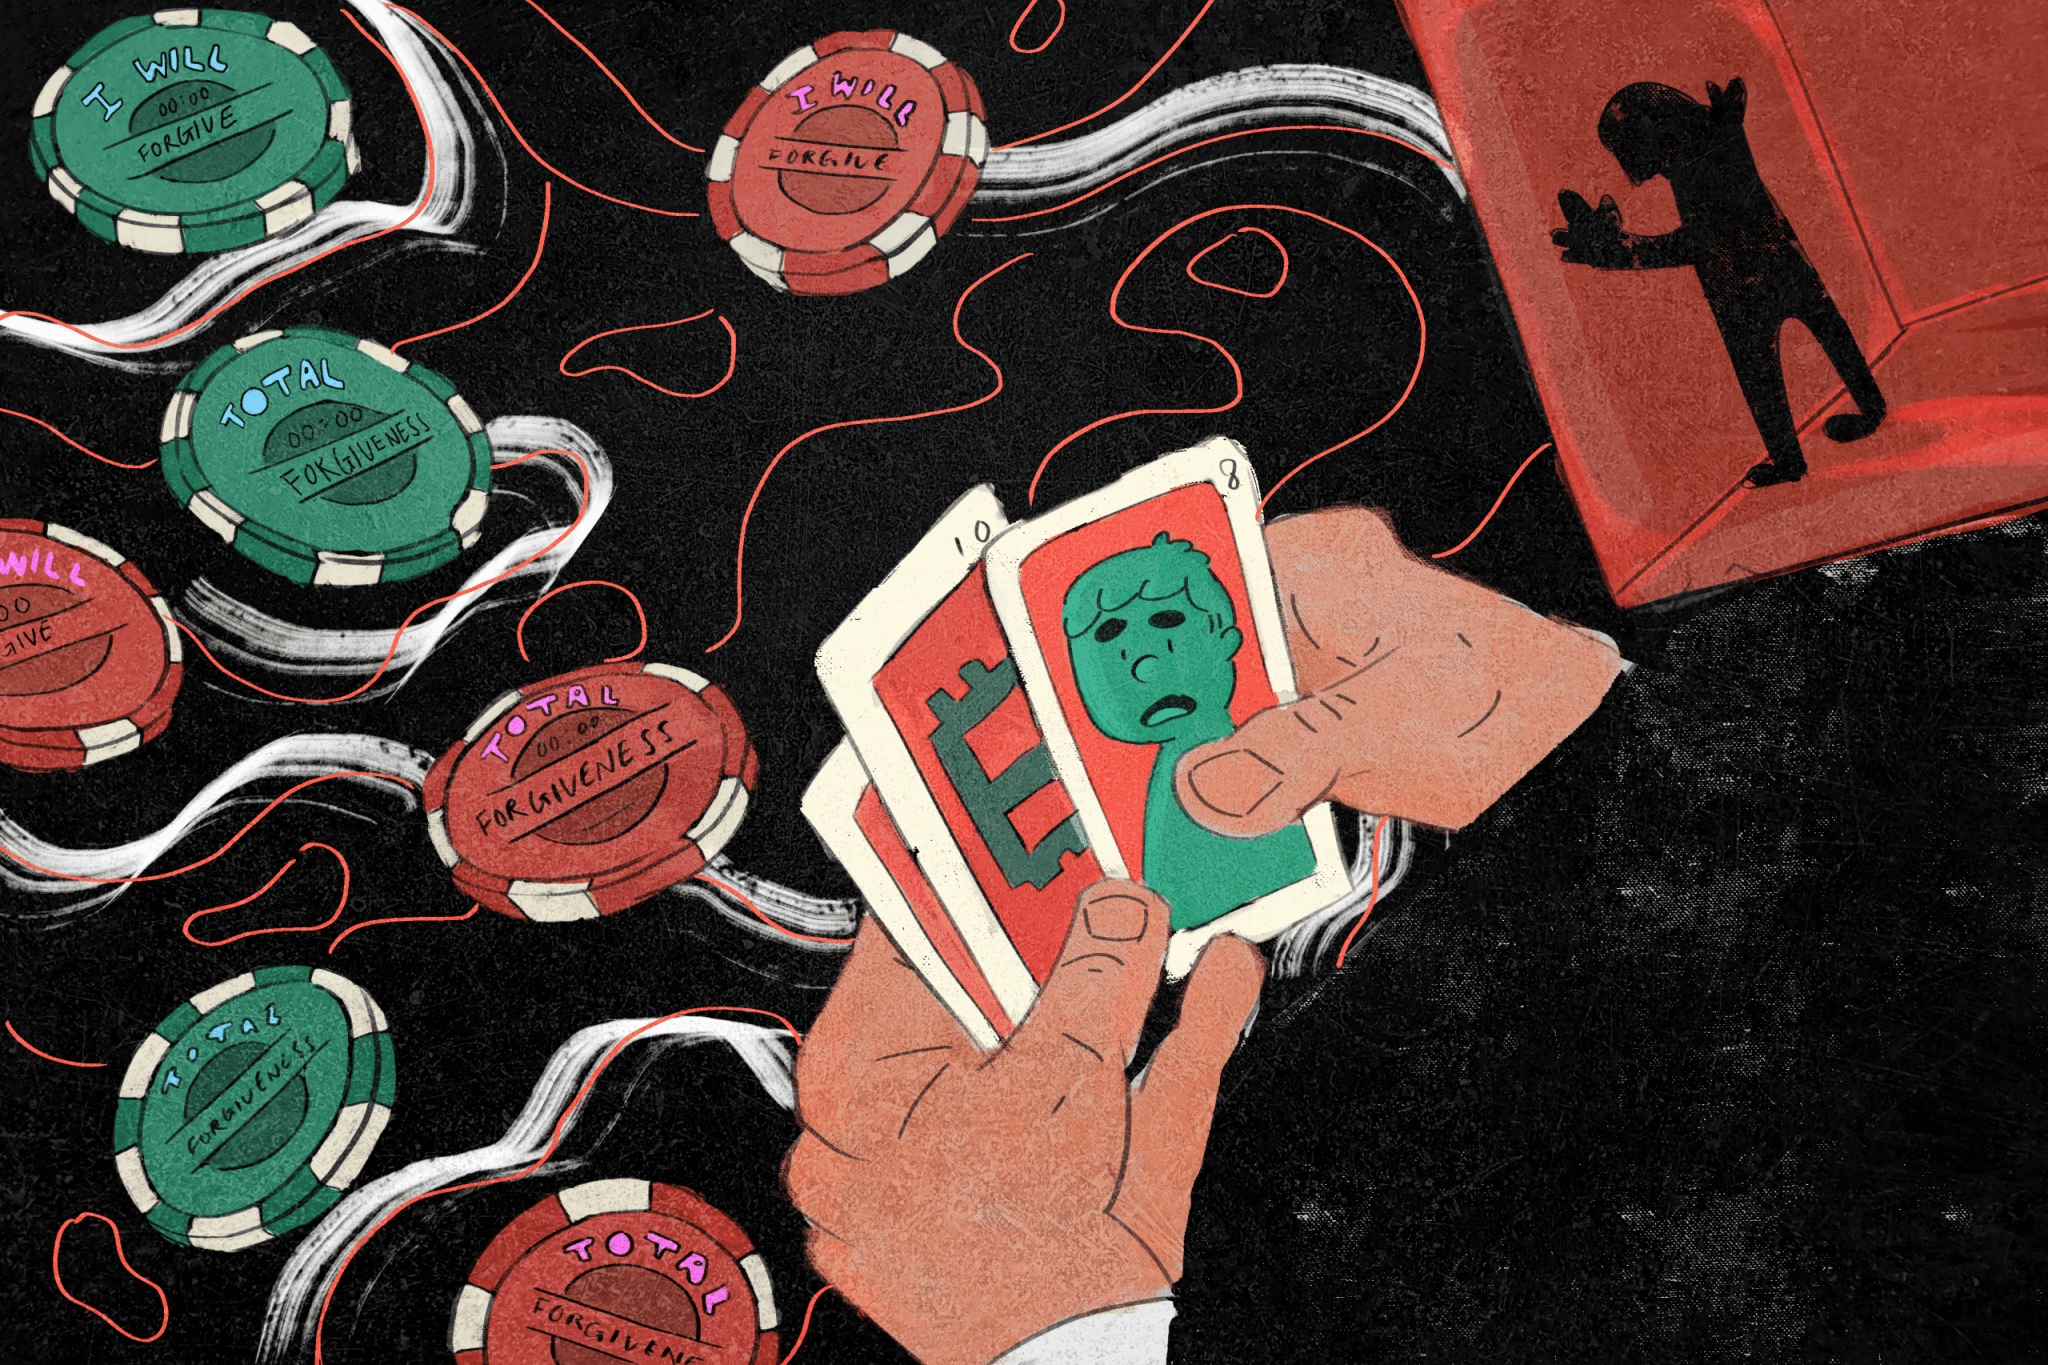 My father’s gambling almost ruined my family: How I forgave him